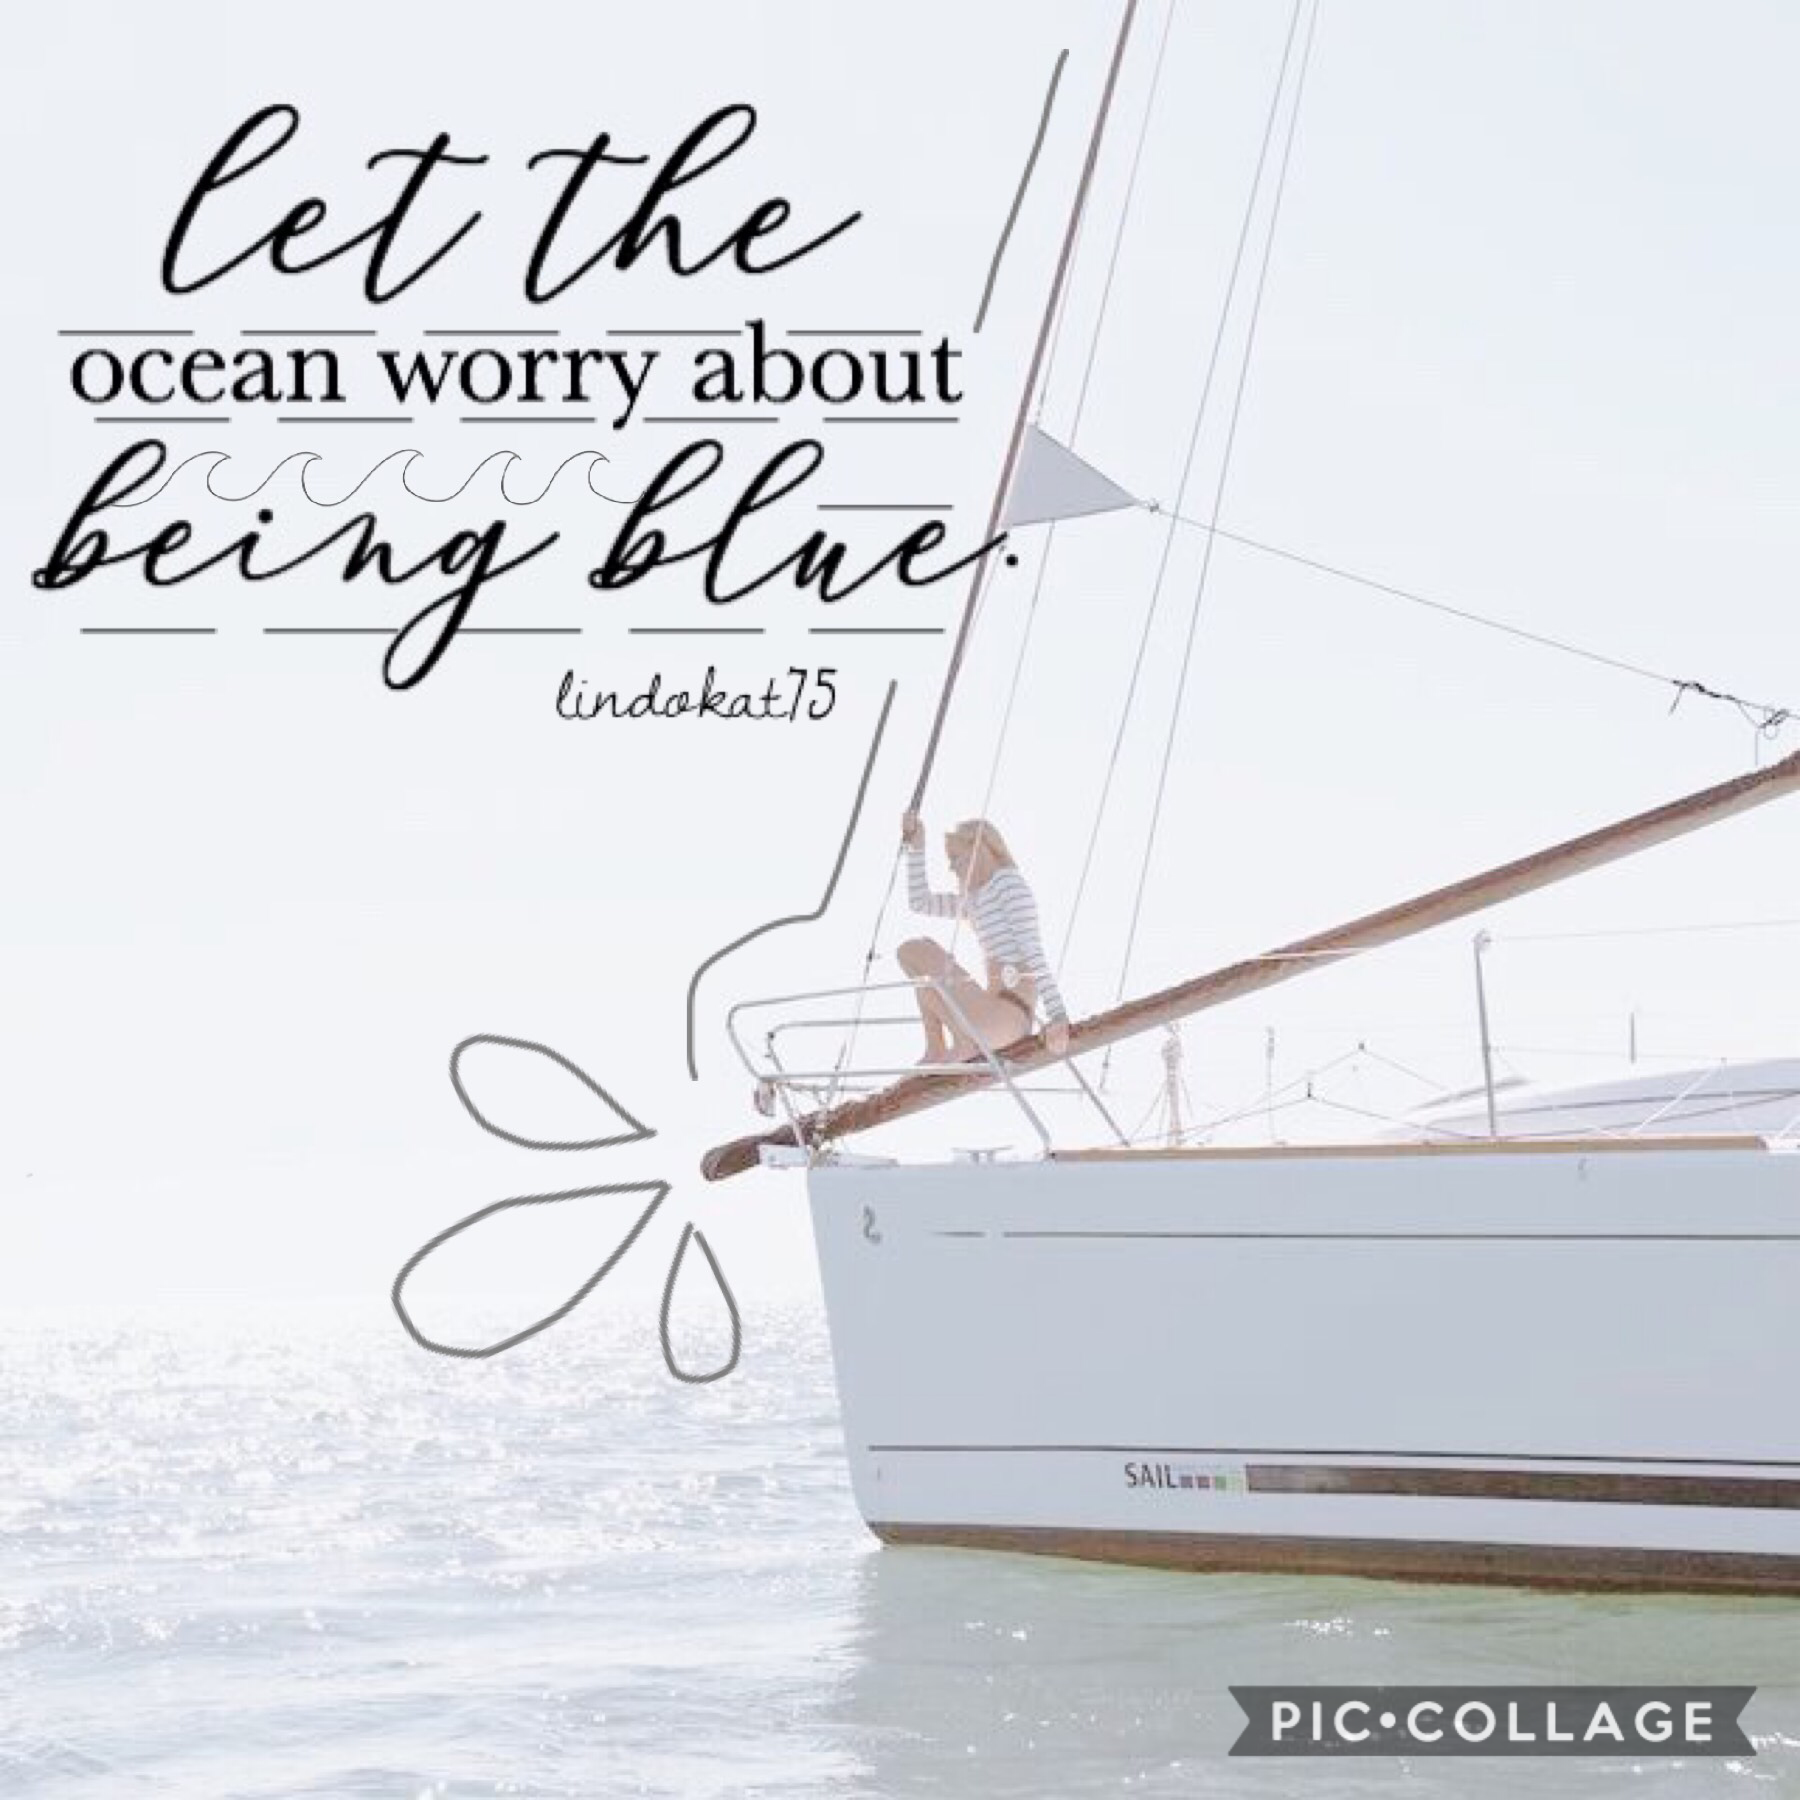 t a p

simple ocean post for today! this is my new fav quote 🌊🌿 qotd: have you ever been on a cruise? aotd: nope, not yet  ✨